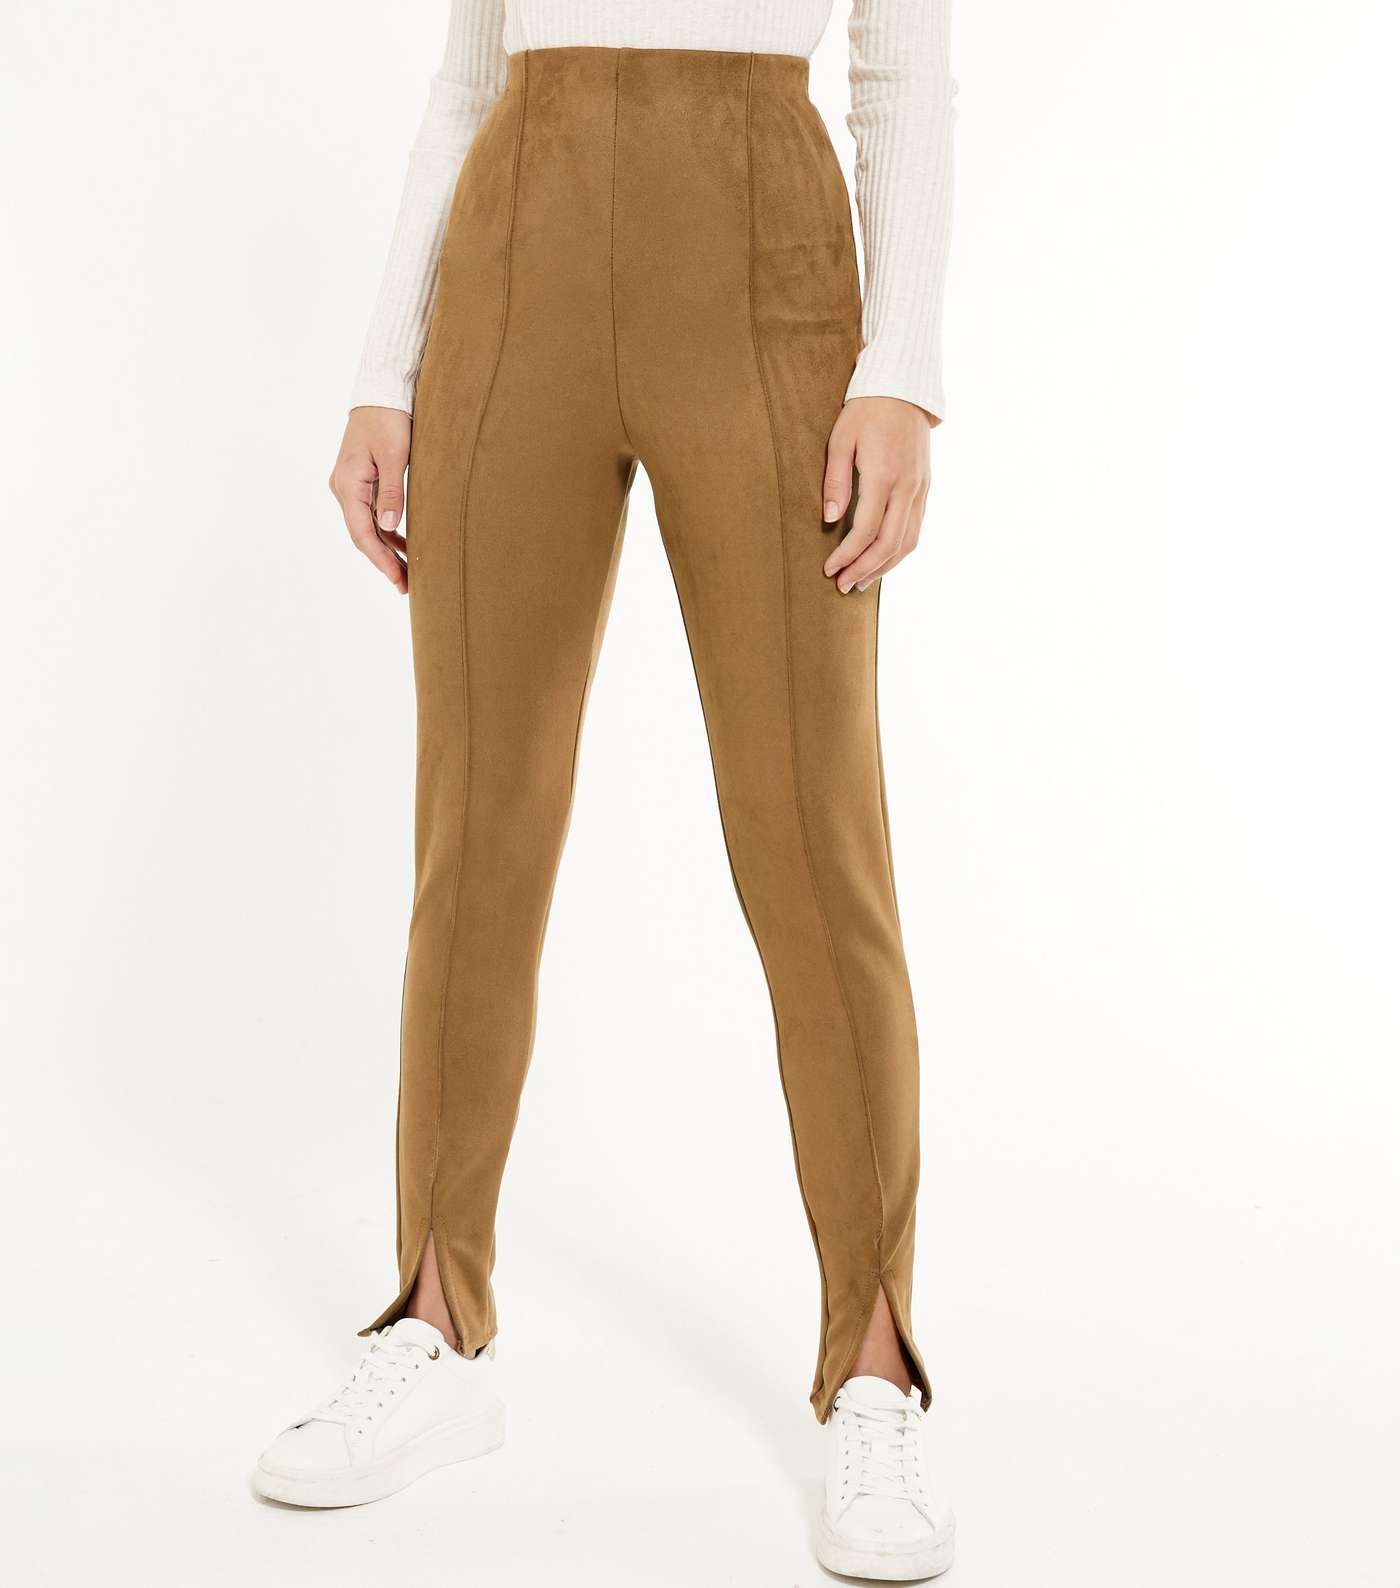 Pink Vanilla Camel Suedette Pintuck Trousers Image 2